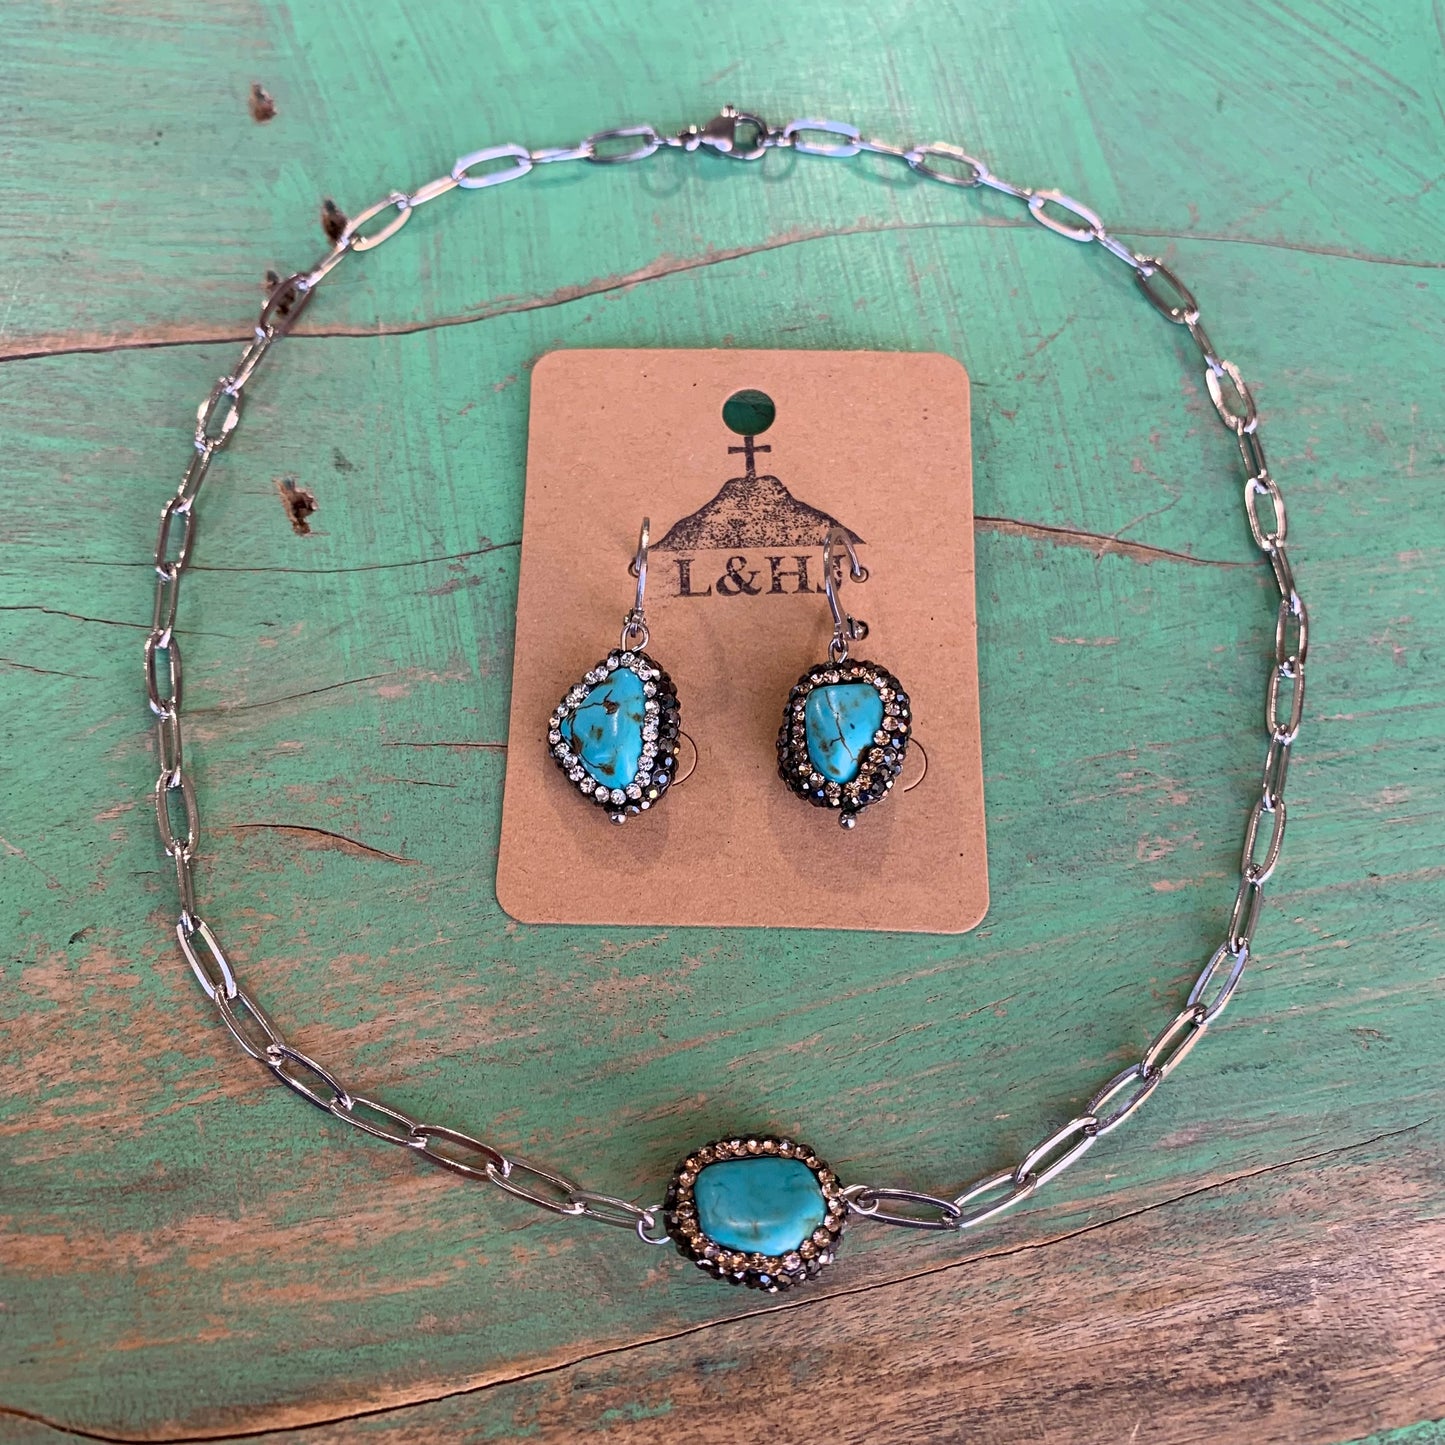 Celestial Blue Necklace and Earrings